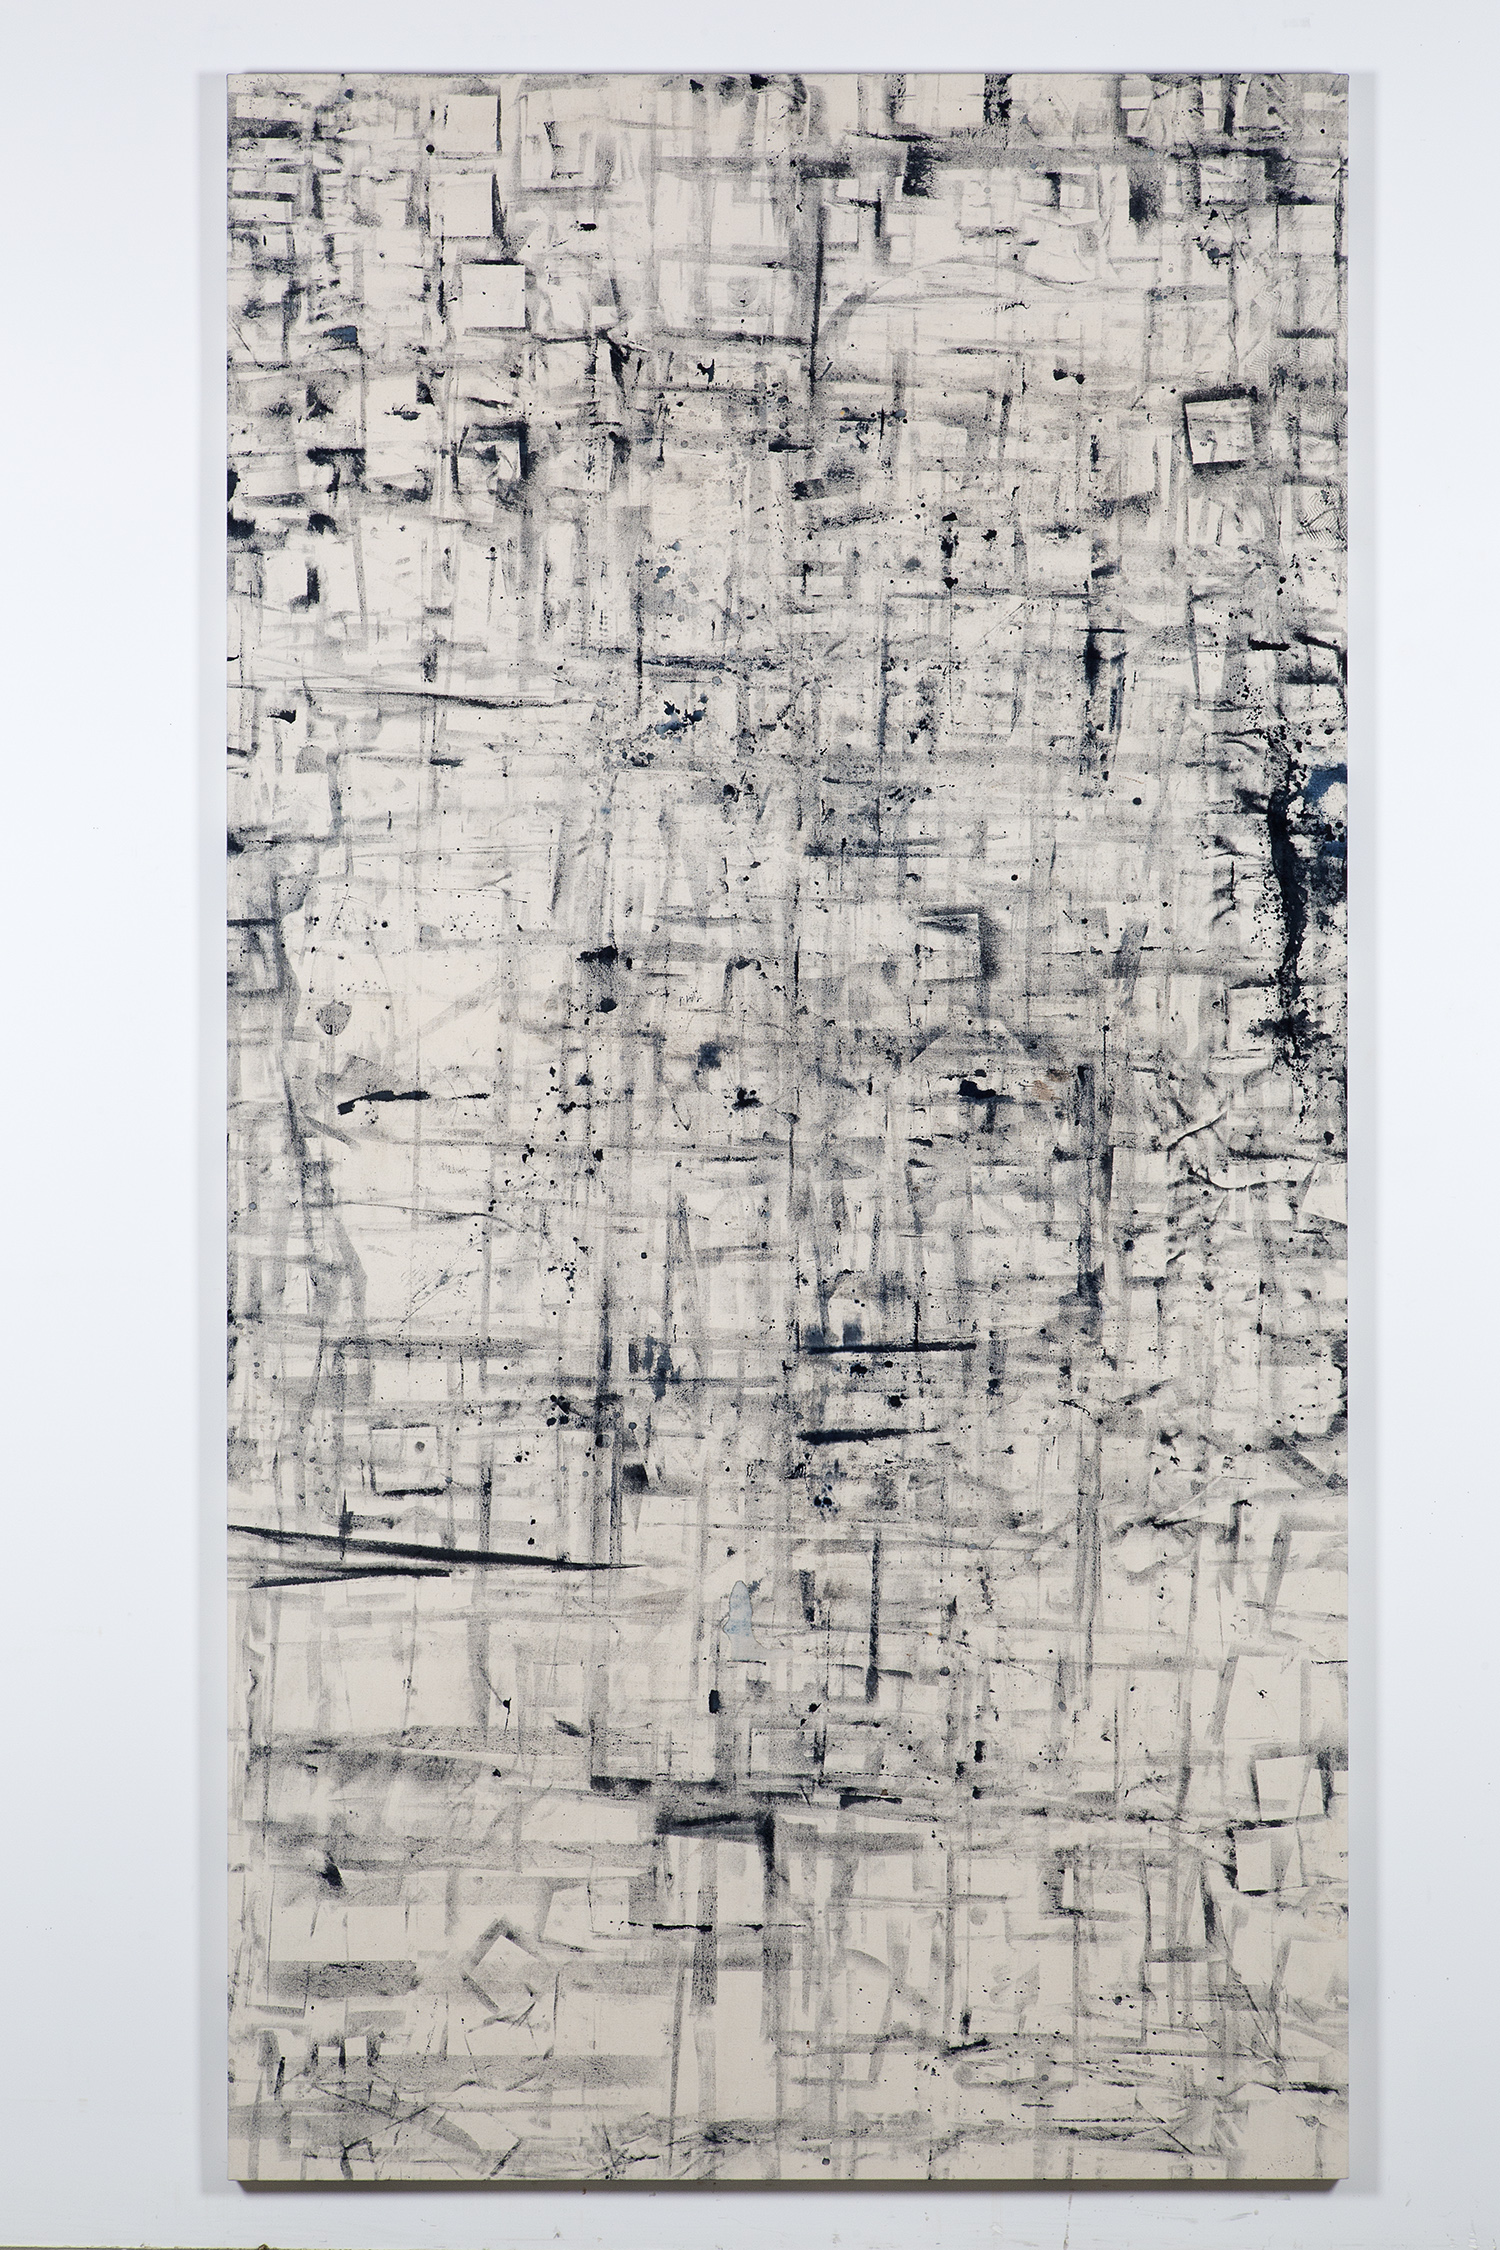   Marginalis (Los Angeles, California, October 21, 2013–January 31, 2014)    2014   Cyanotype chemistry on canvas  104 x 55 inches   Cyanotype Paintings, 2013–2015     